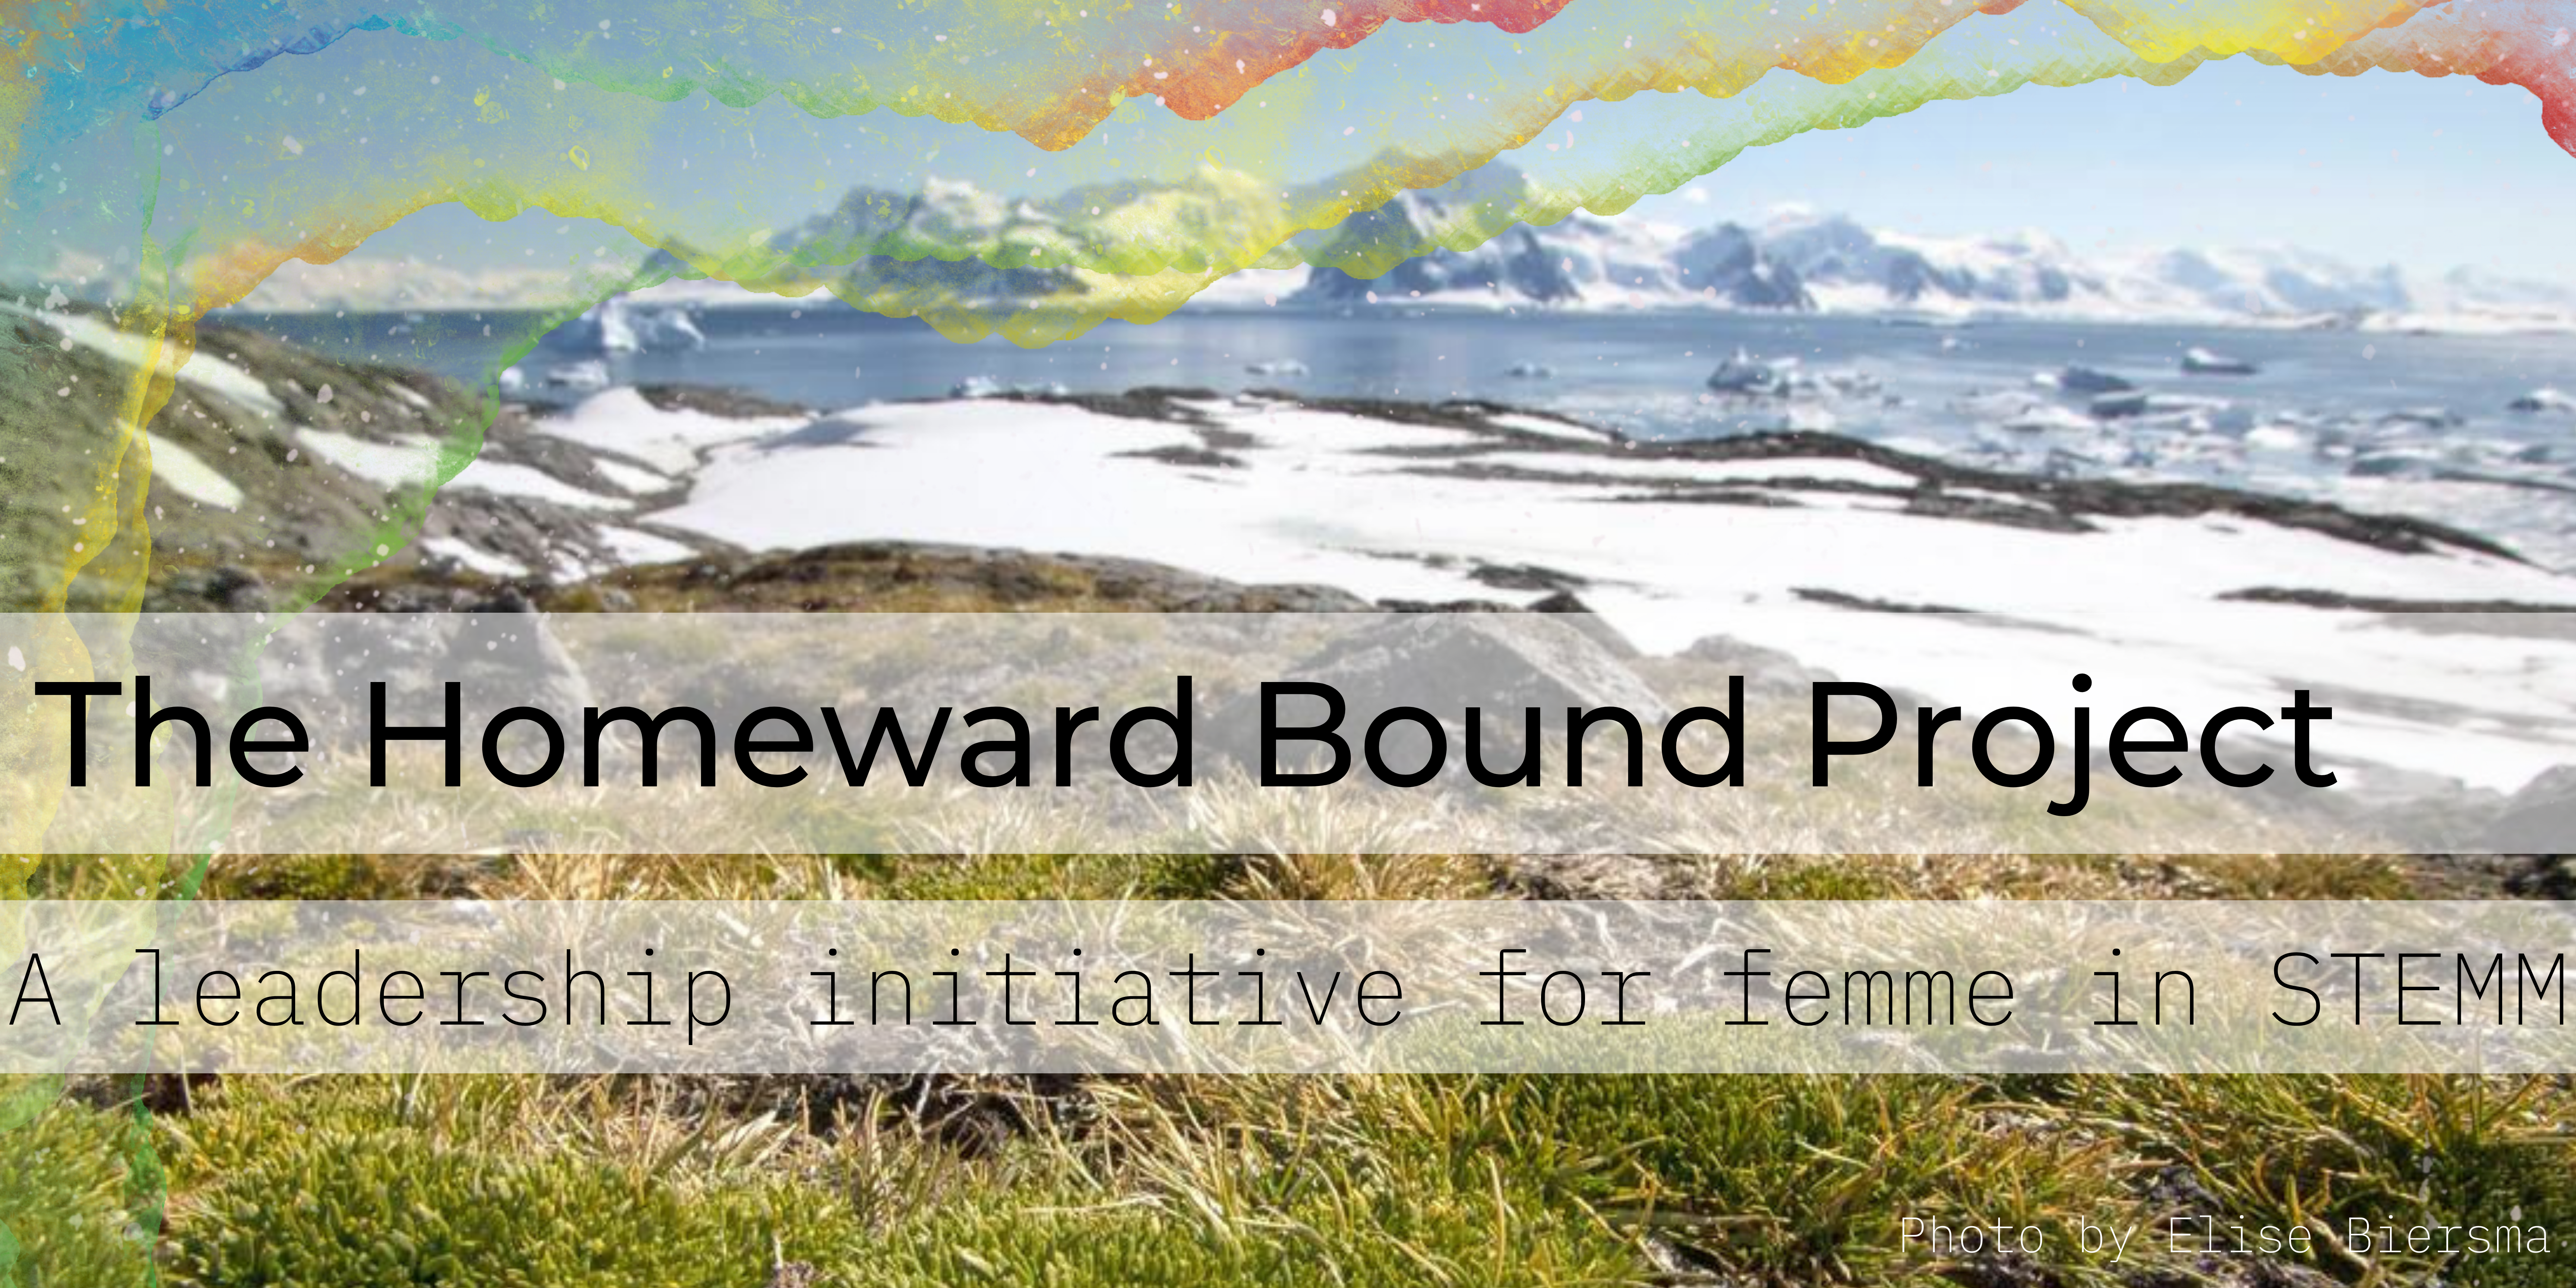 The Homeward Bound Project